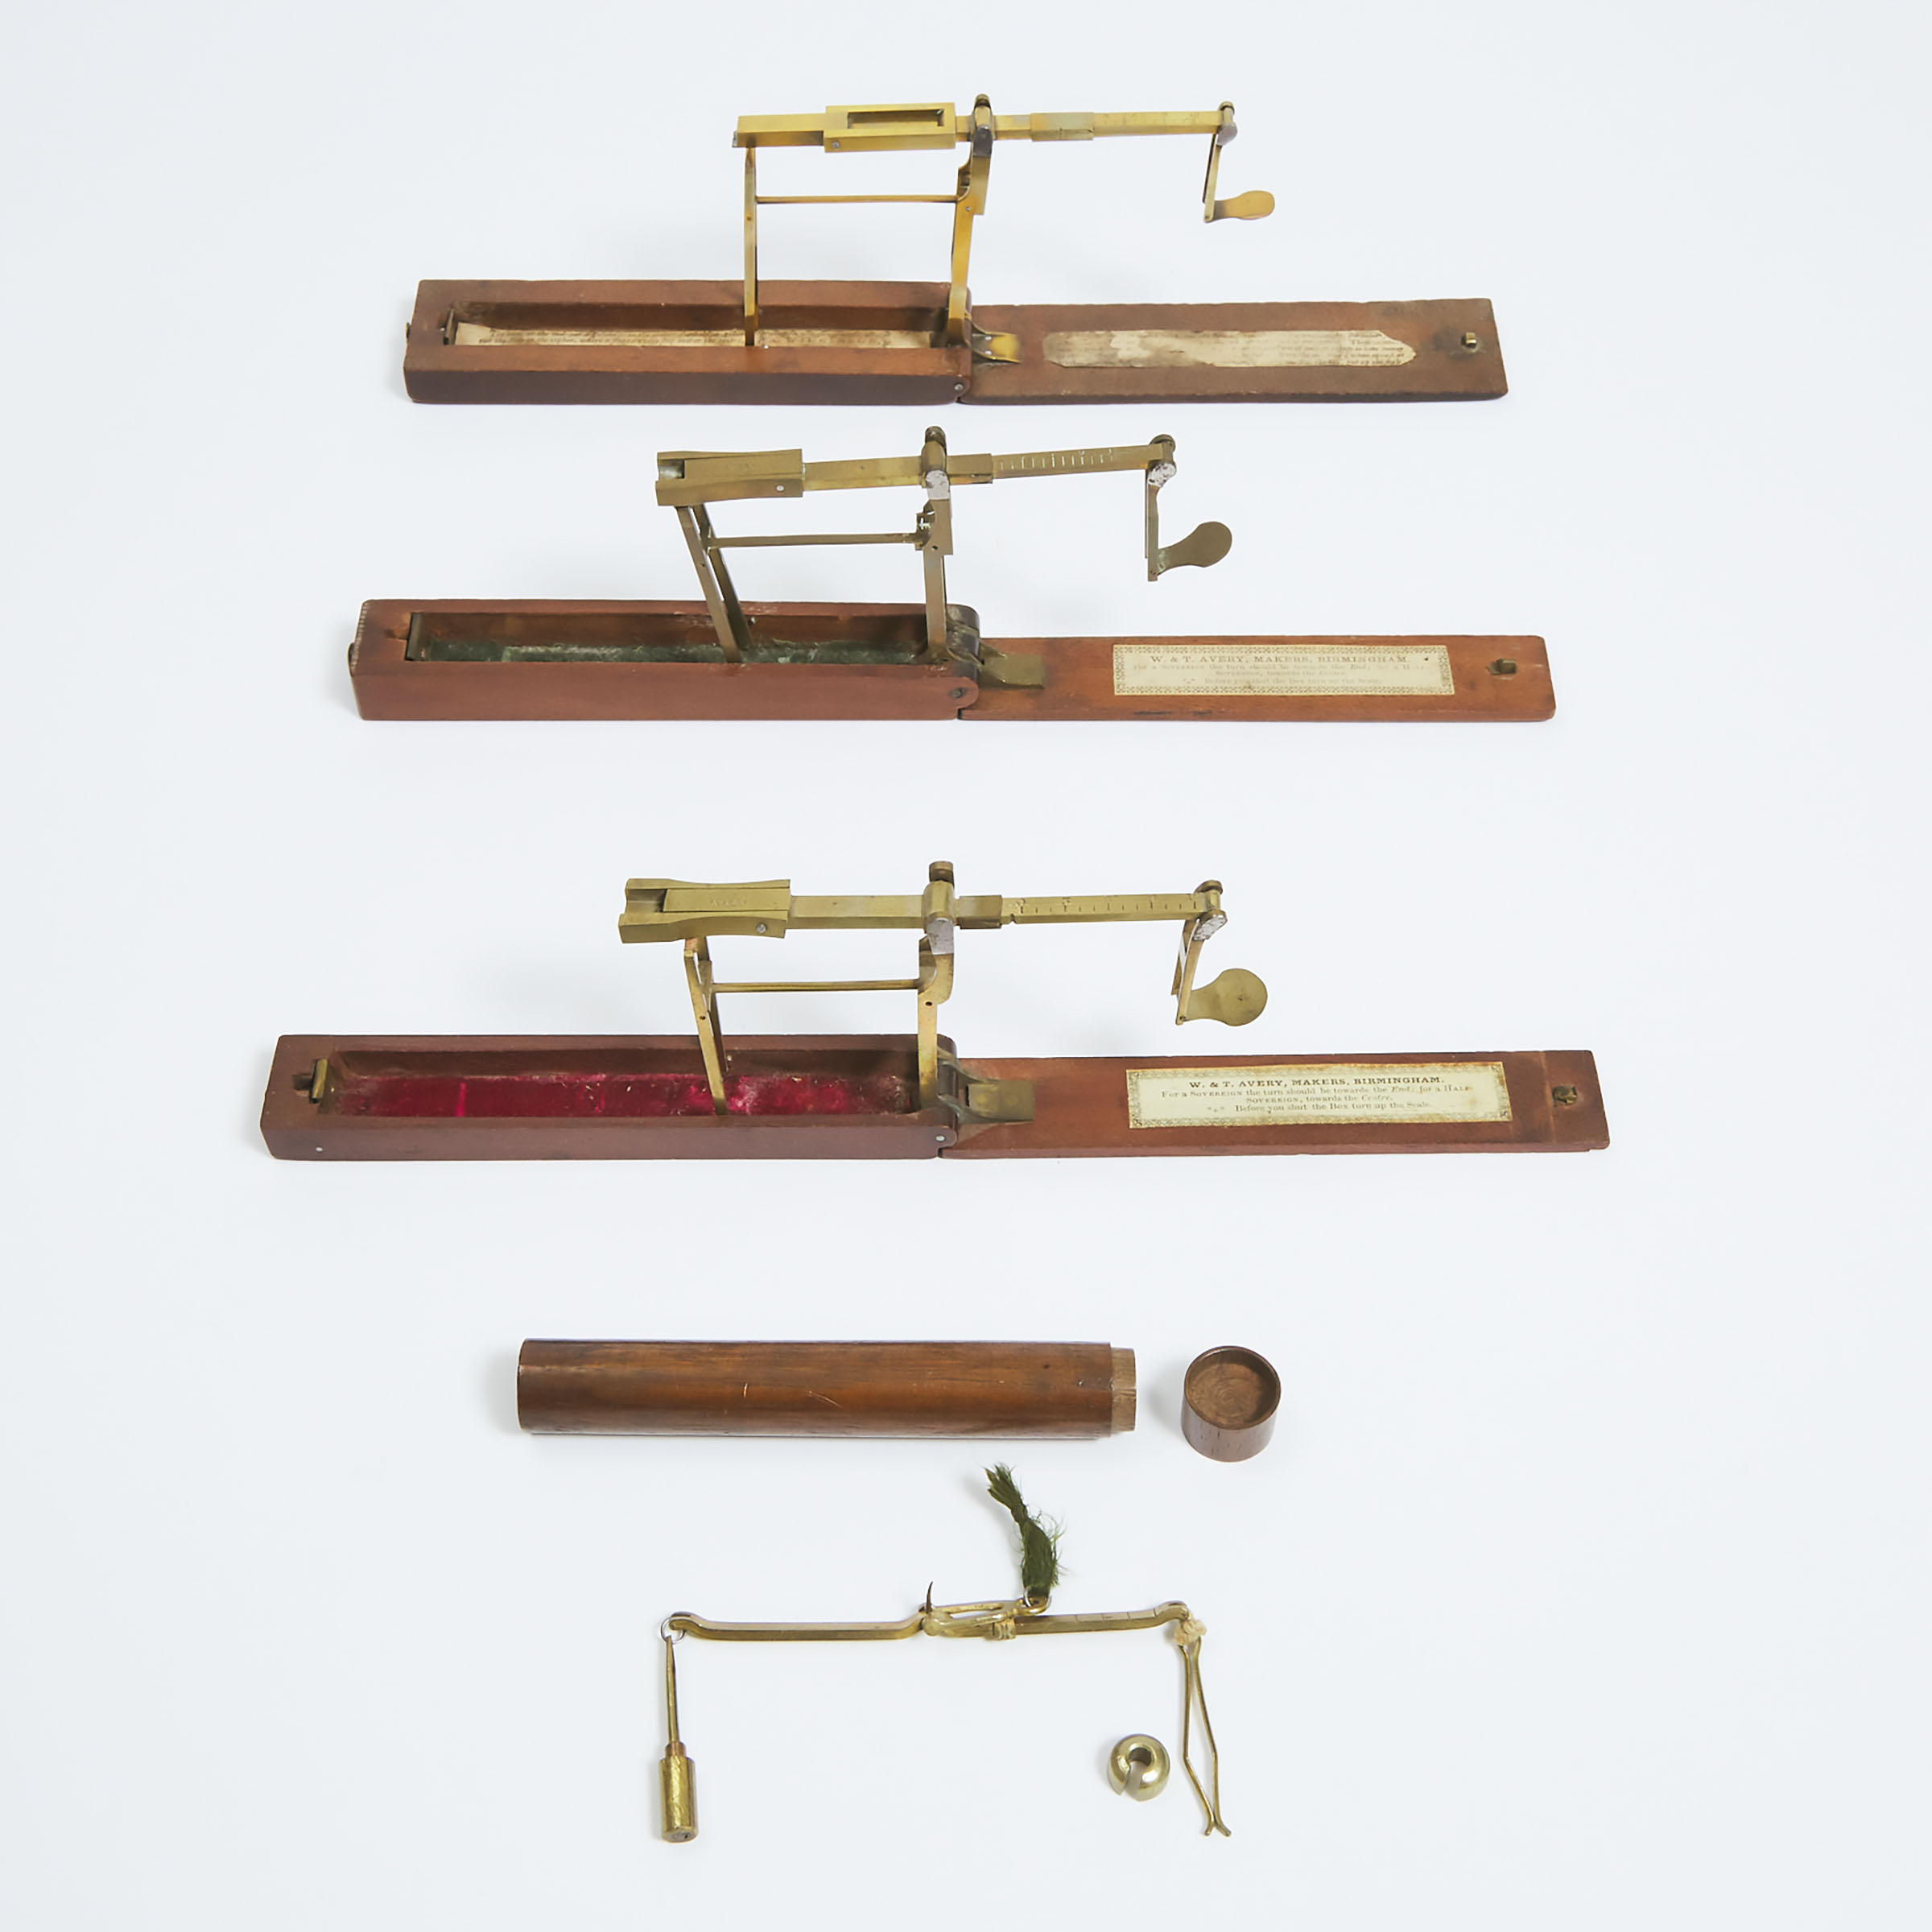 Four English Brass Sovereign Scales, 18th century